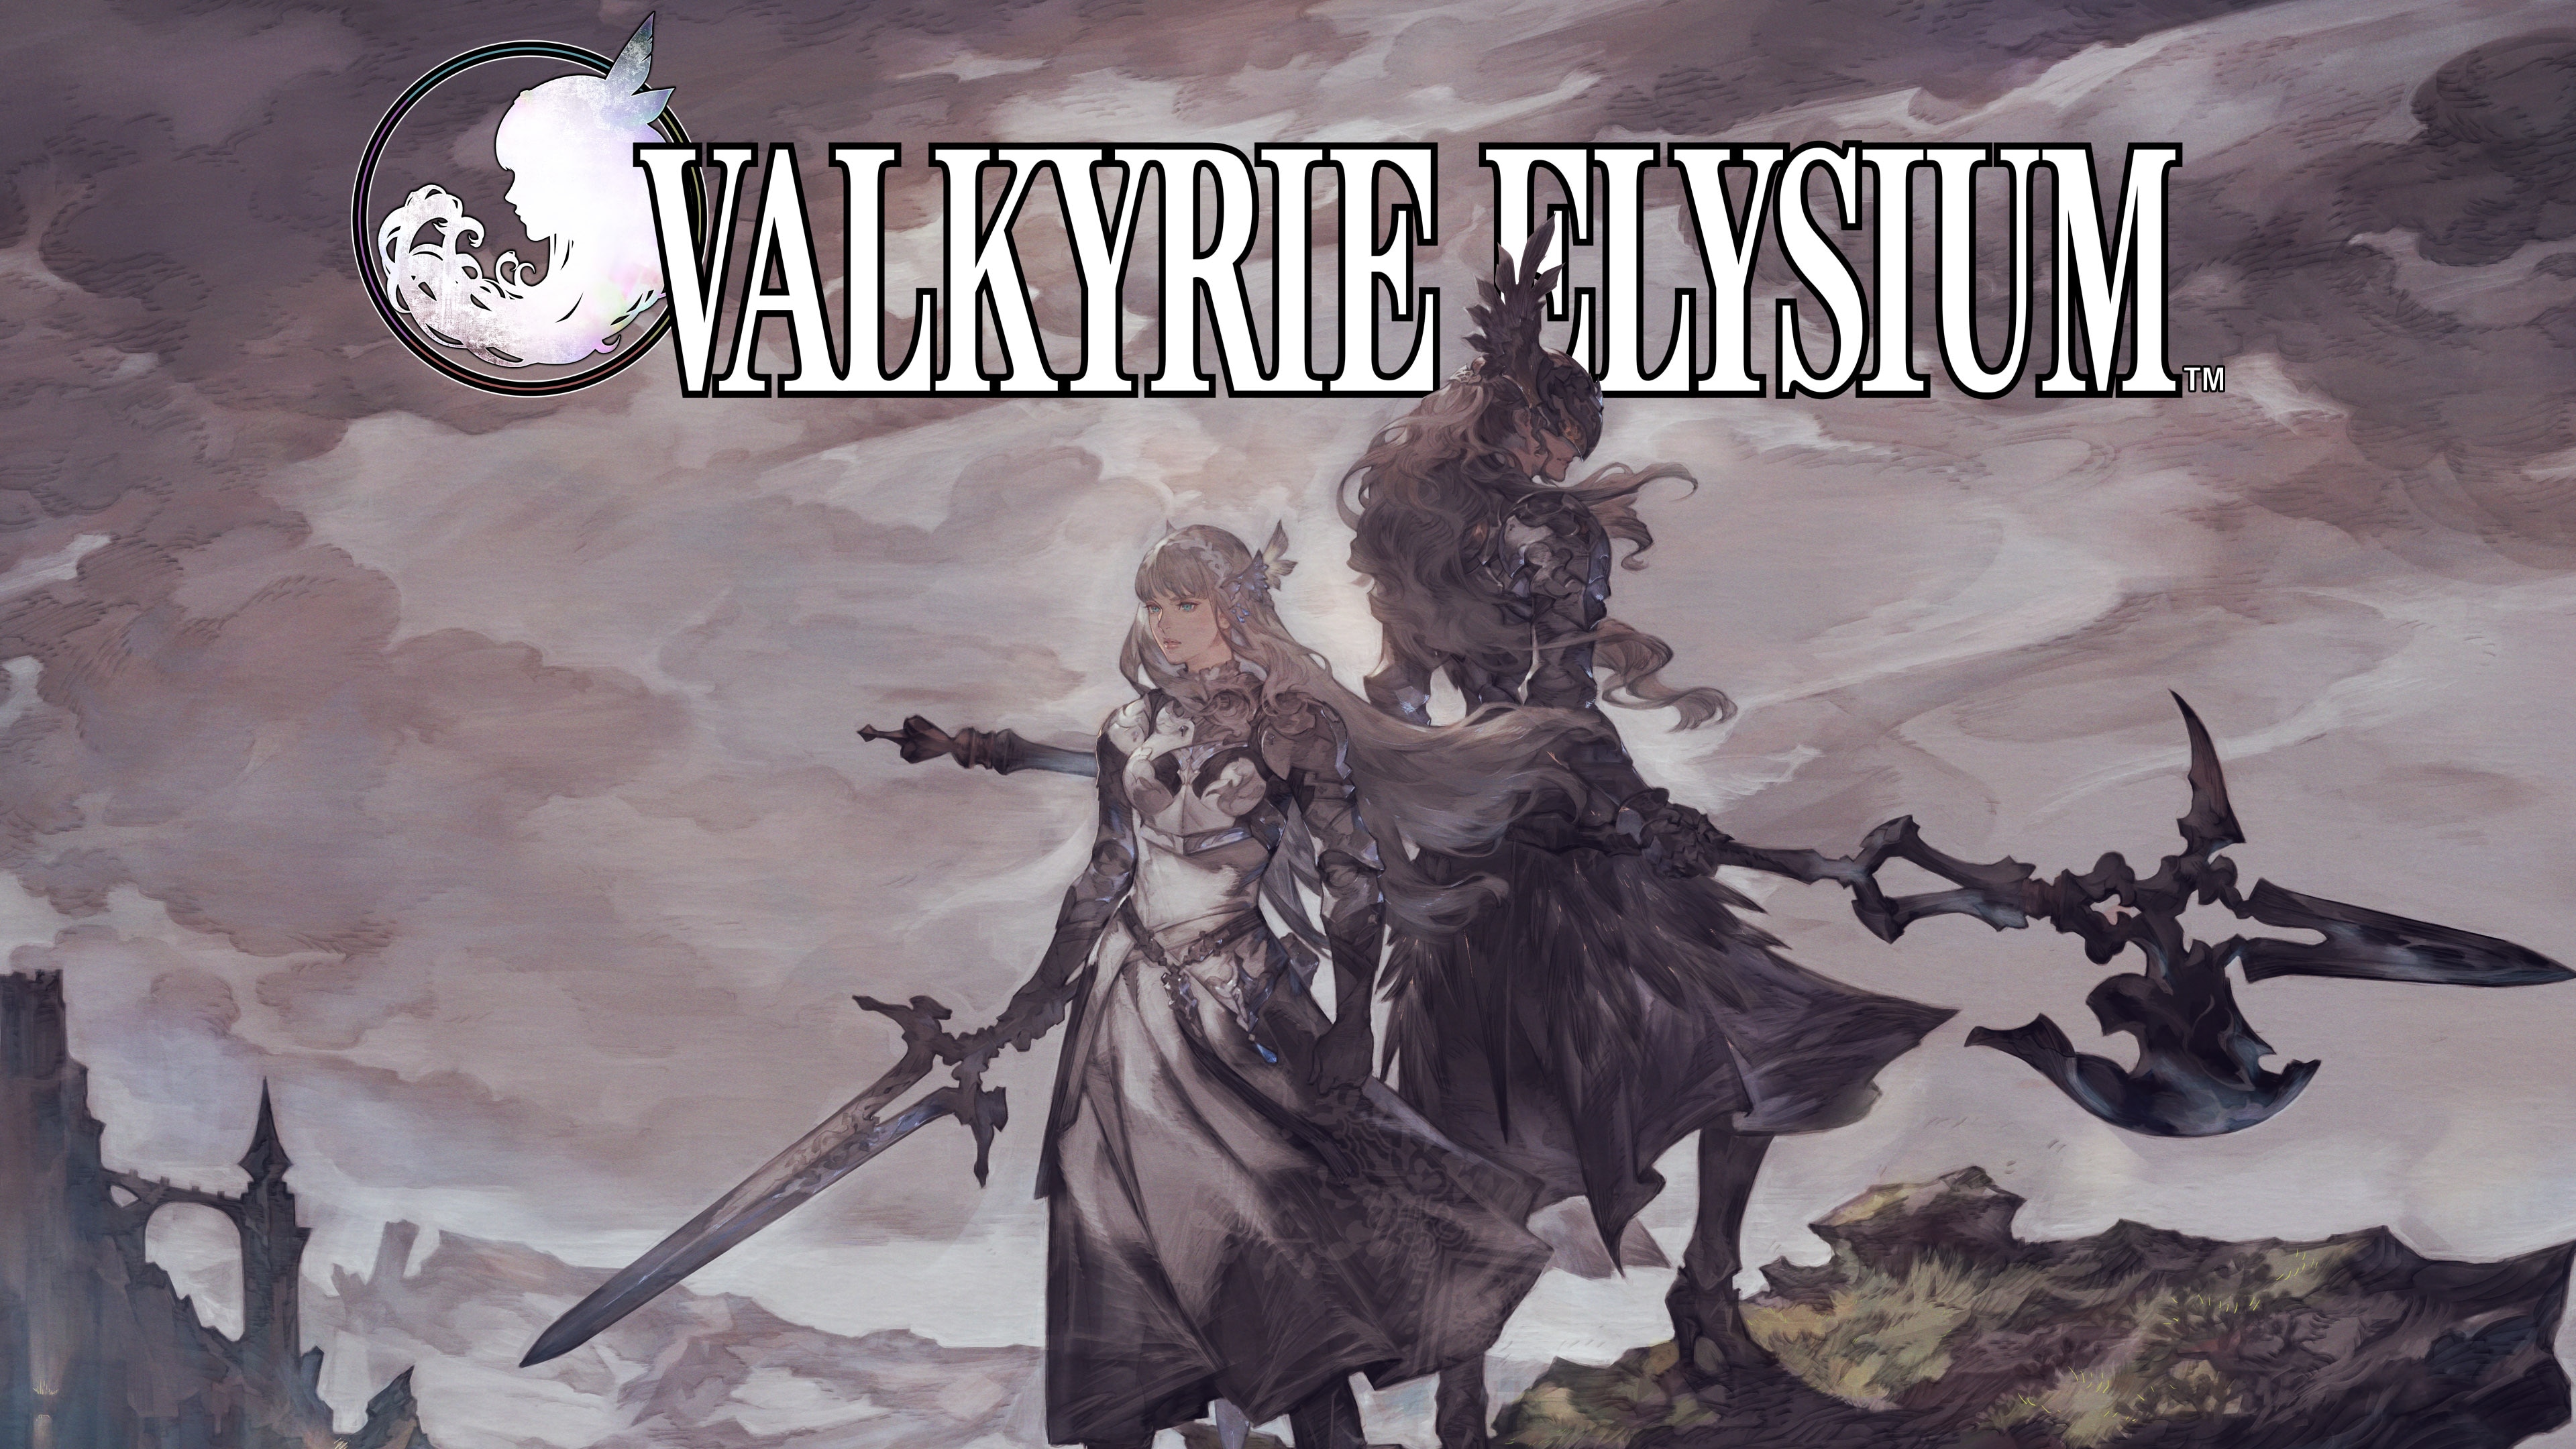 Video Game Valkyrie Elysium HD Wallpaper | Background Image